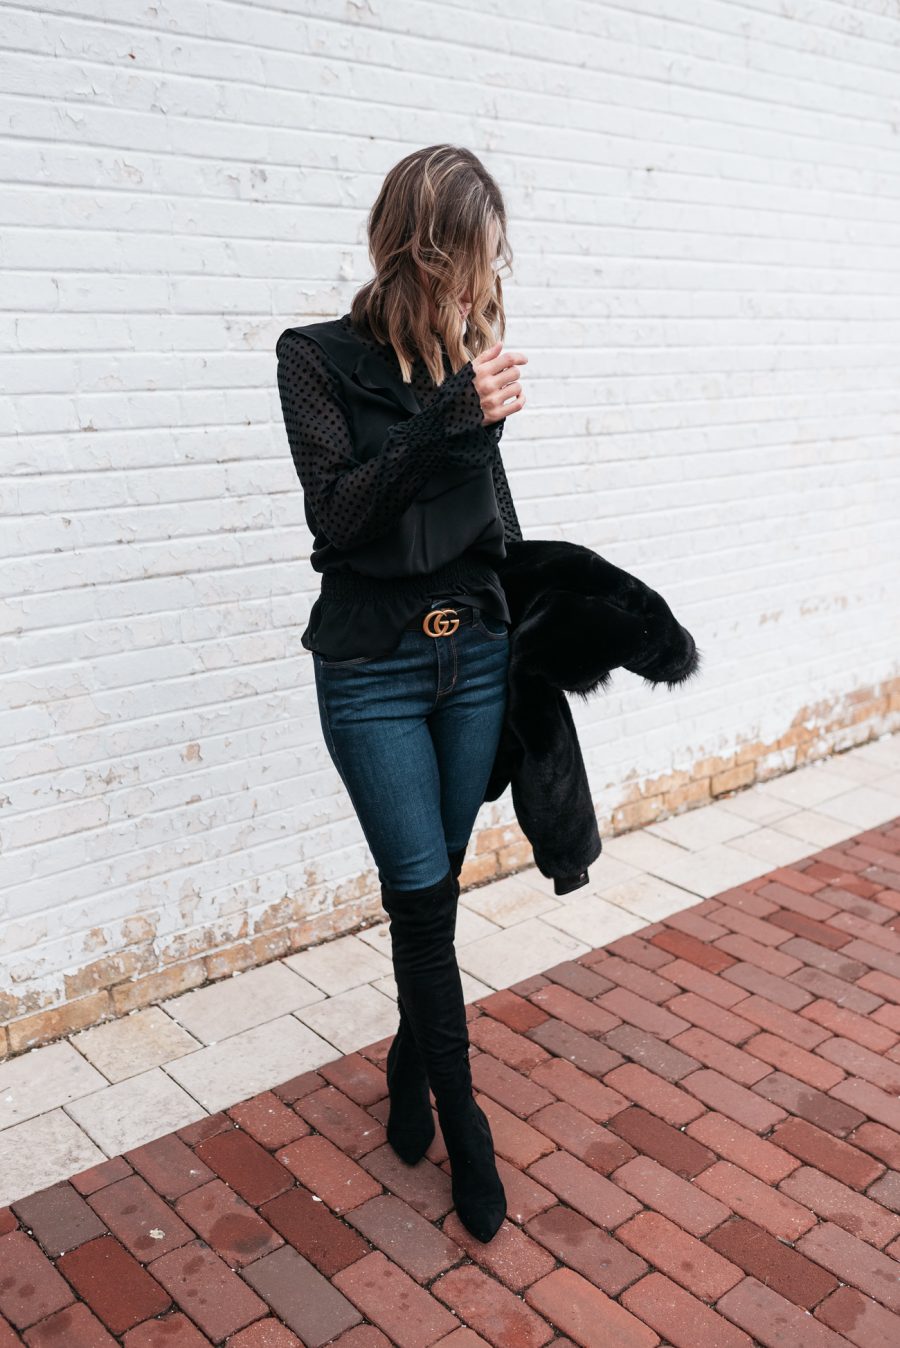 Faux fur jacket, black blouse, skinny jeans, and over the knee boots